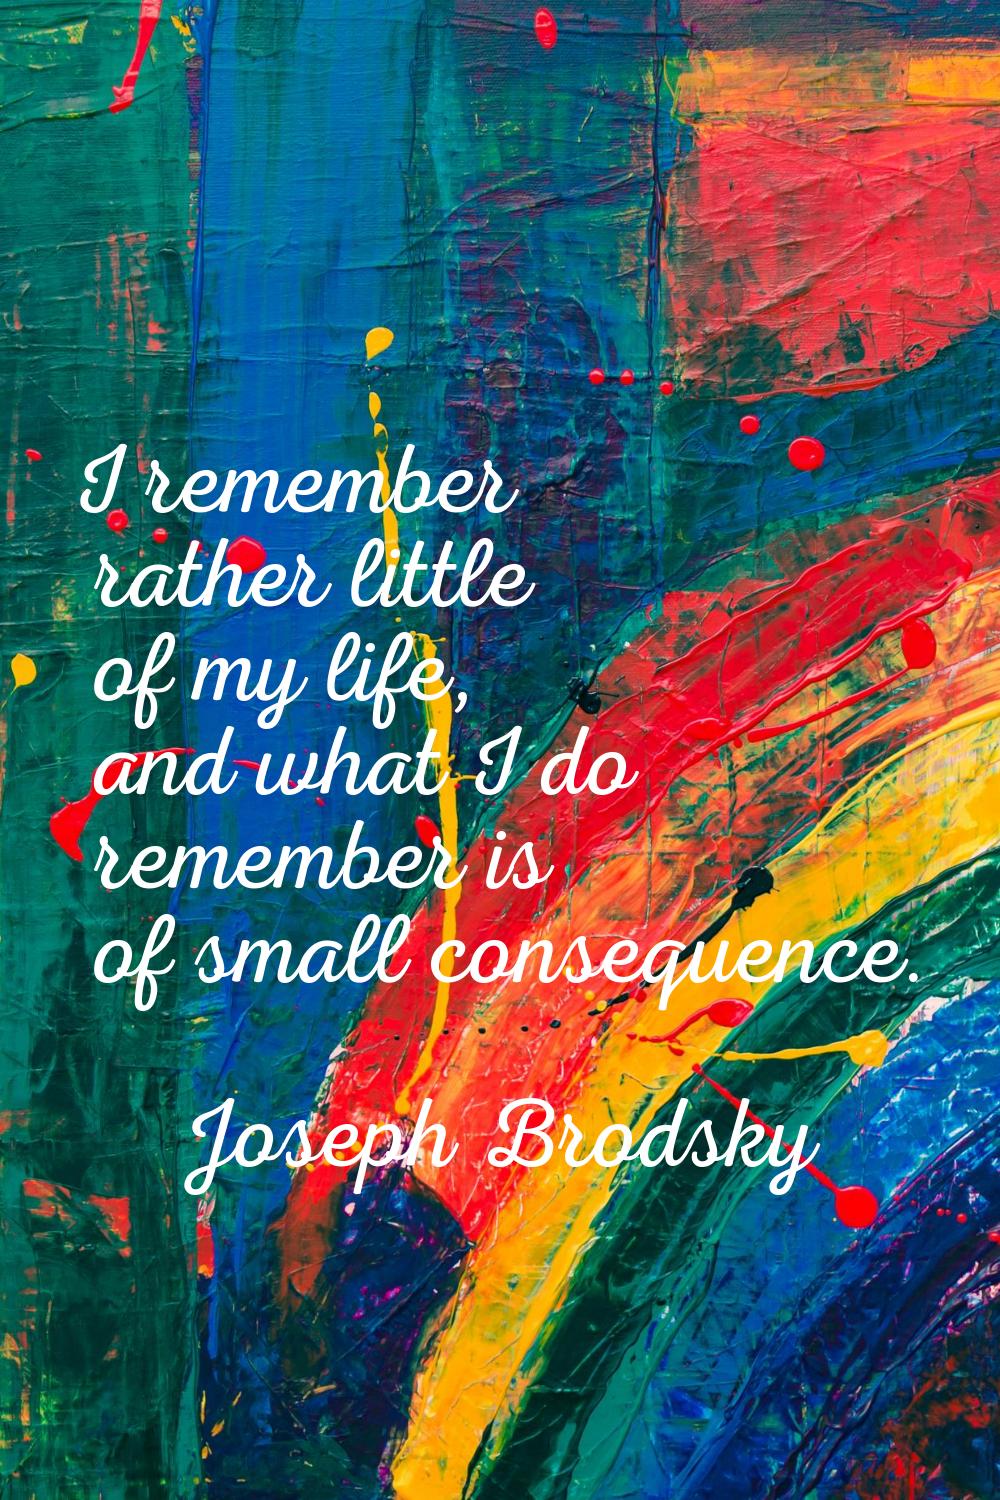 I remember rather little of my life, and what I do remember is of small consequence.